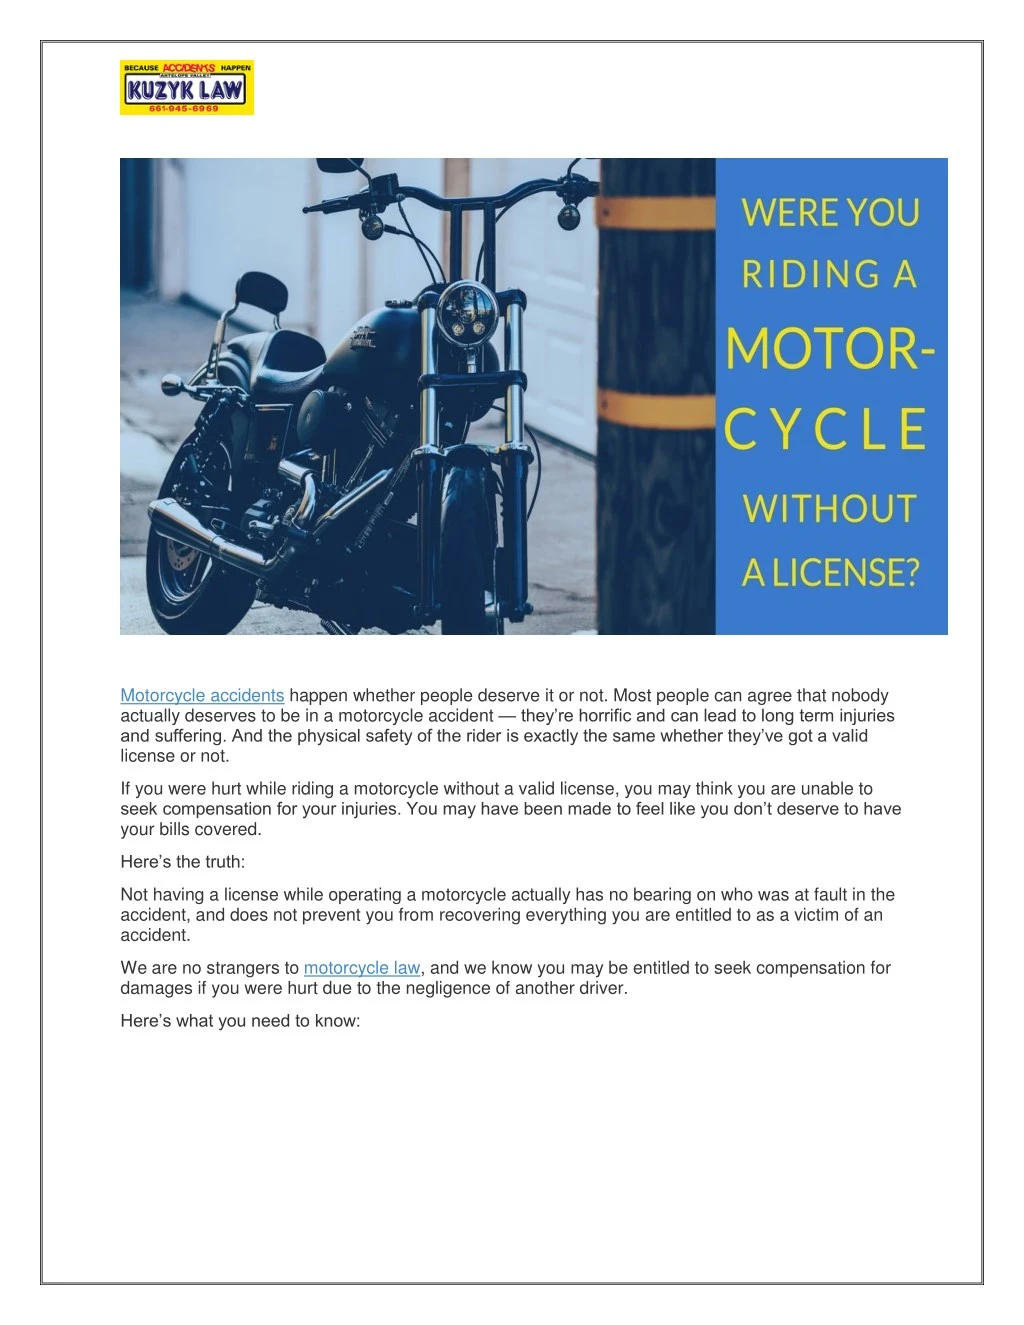 motorcycle accidents happen whether people